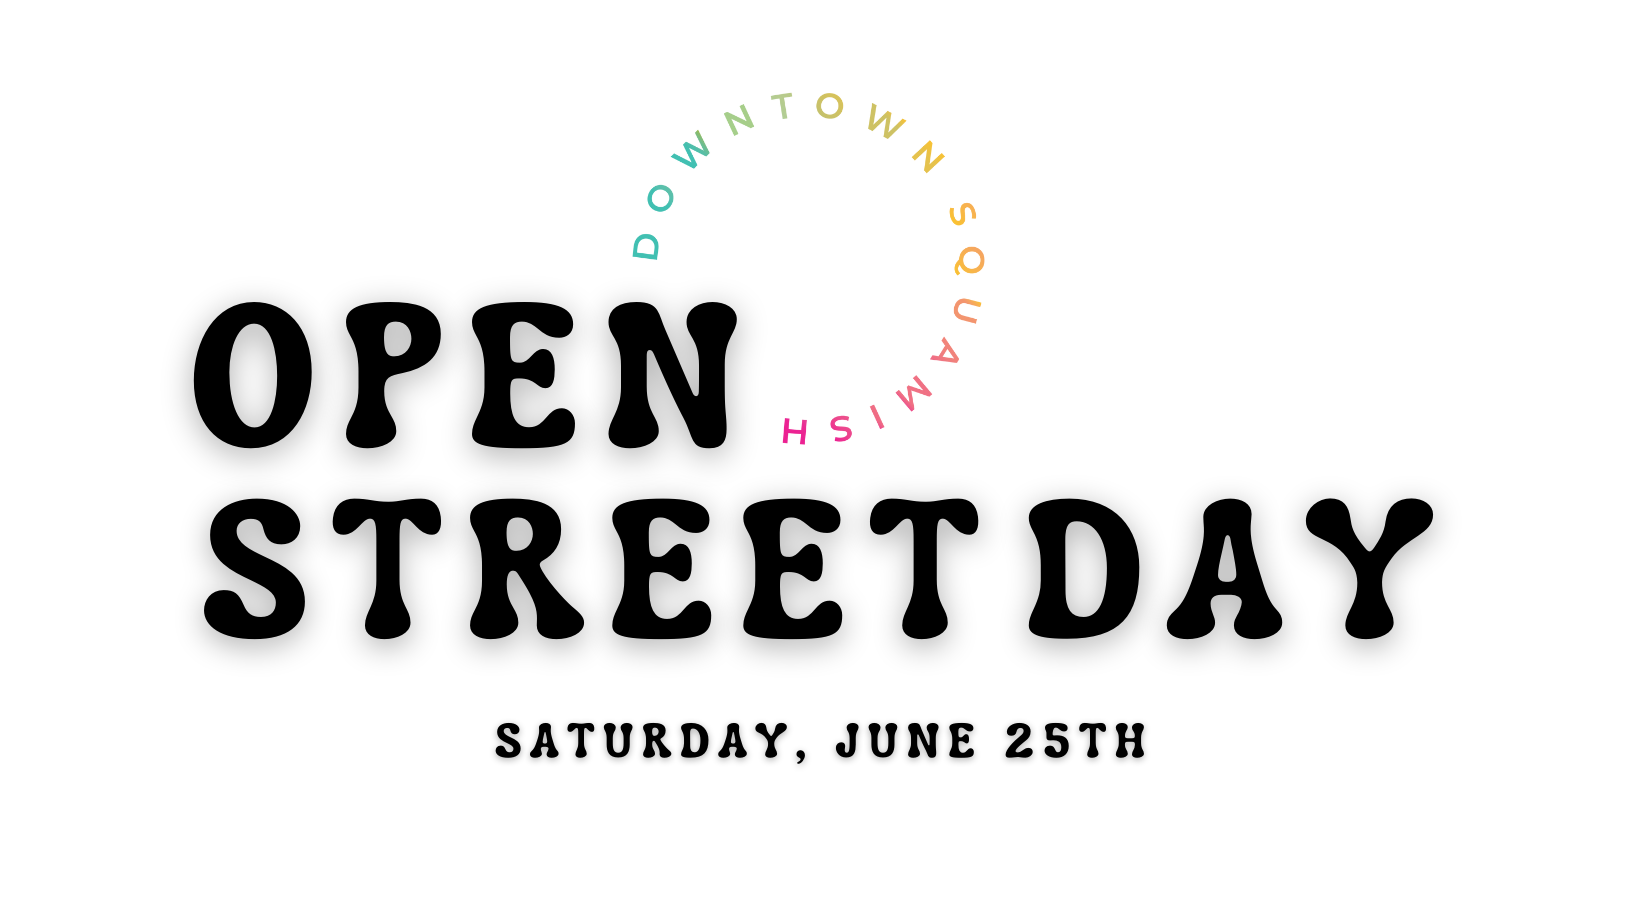 https://www.downtownsquamish.com/wp-content/uploads/2022/05/Open-Street-Day-Website-Logo.png